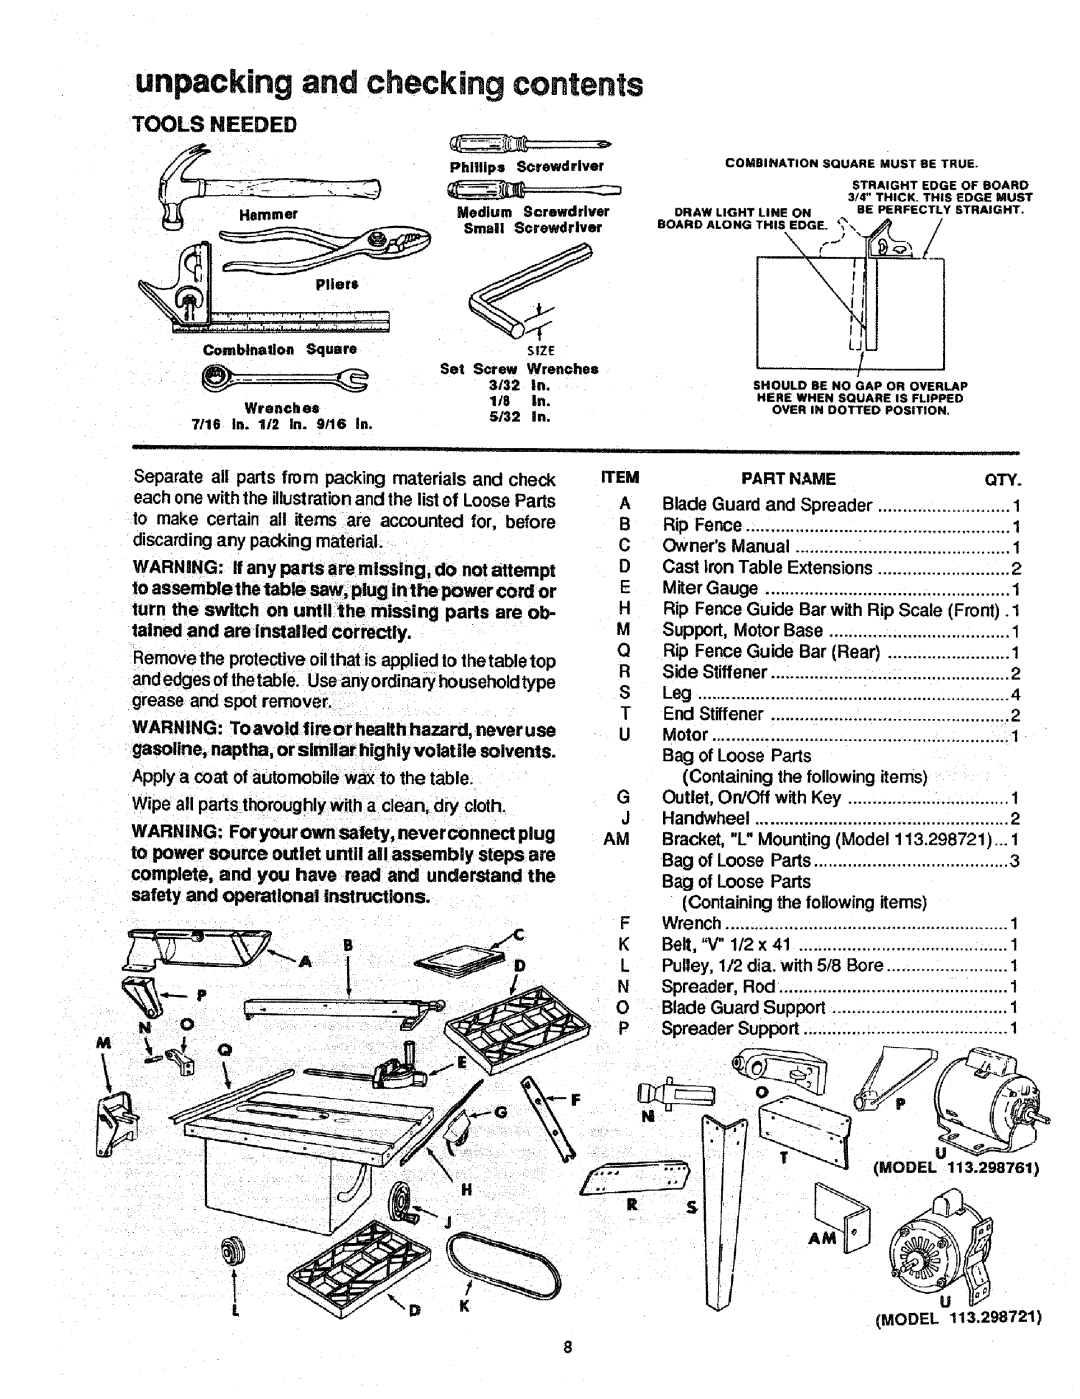 Craftsman 113.298721, 113.298761 manual unpacking and checking contents, Tools Needed 